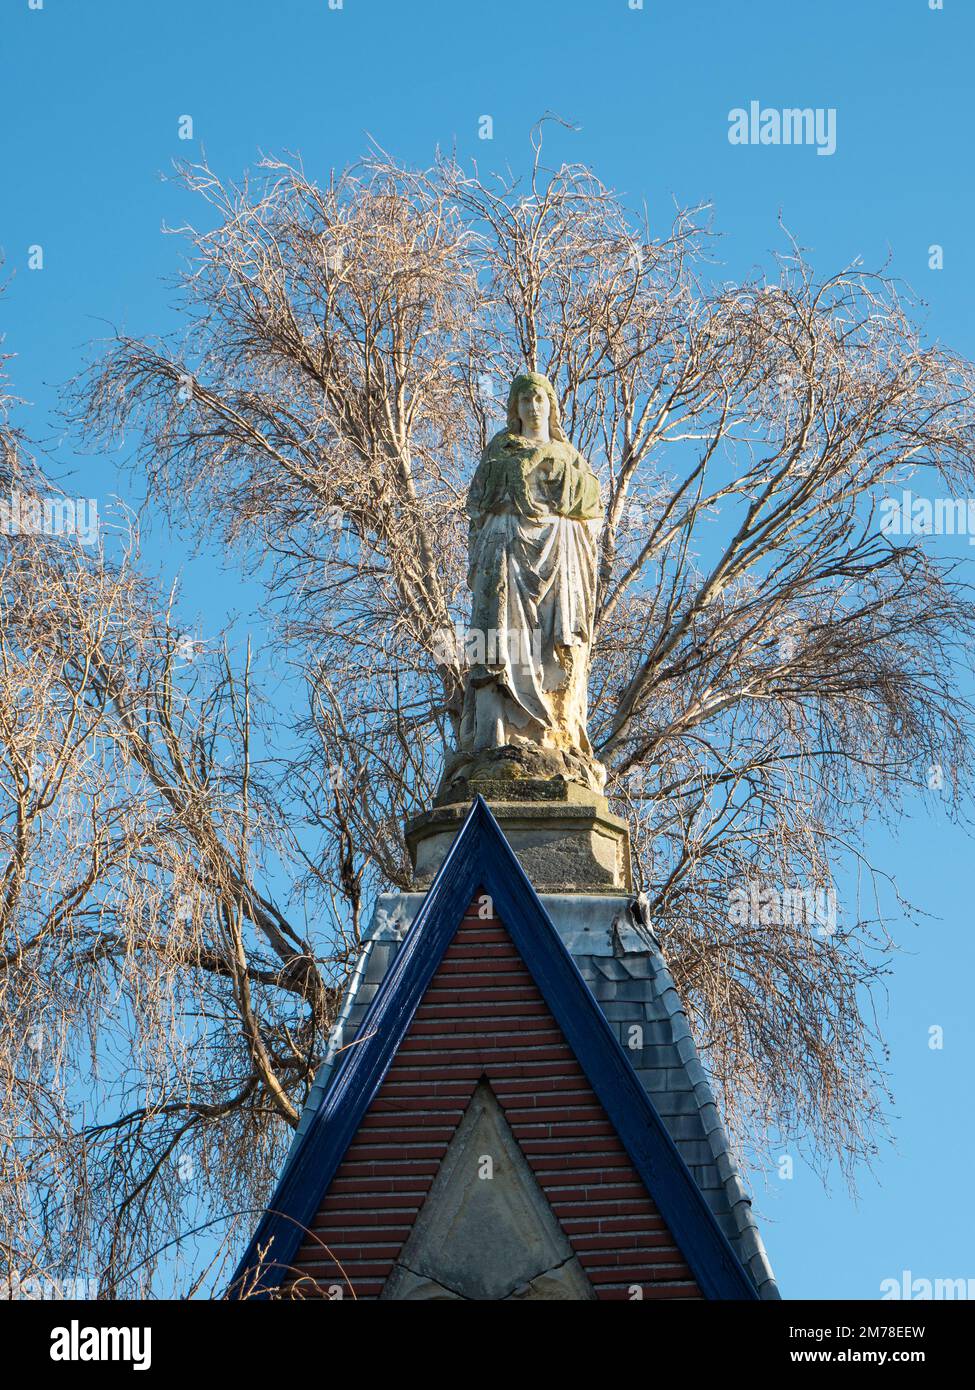 Statue of the Virgin Mary with a dry tree in the background Stock Photo